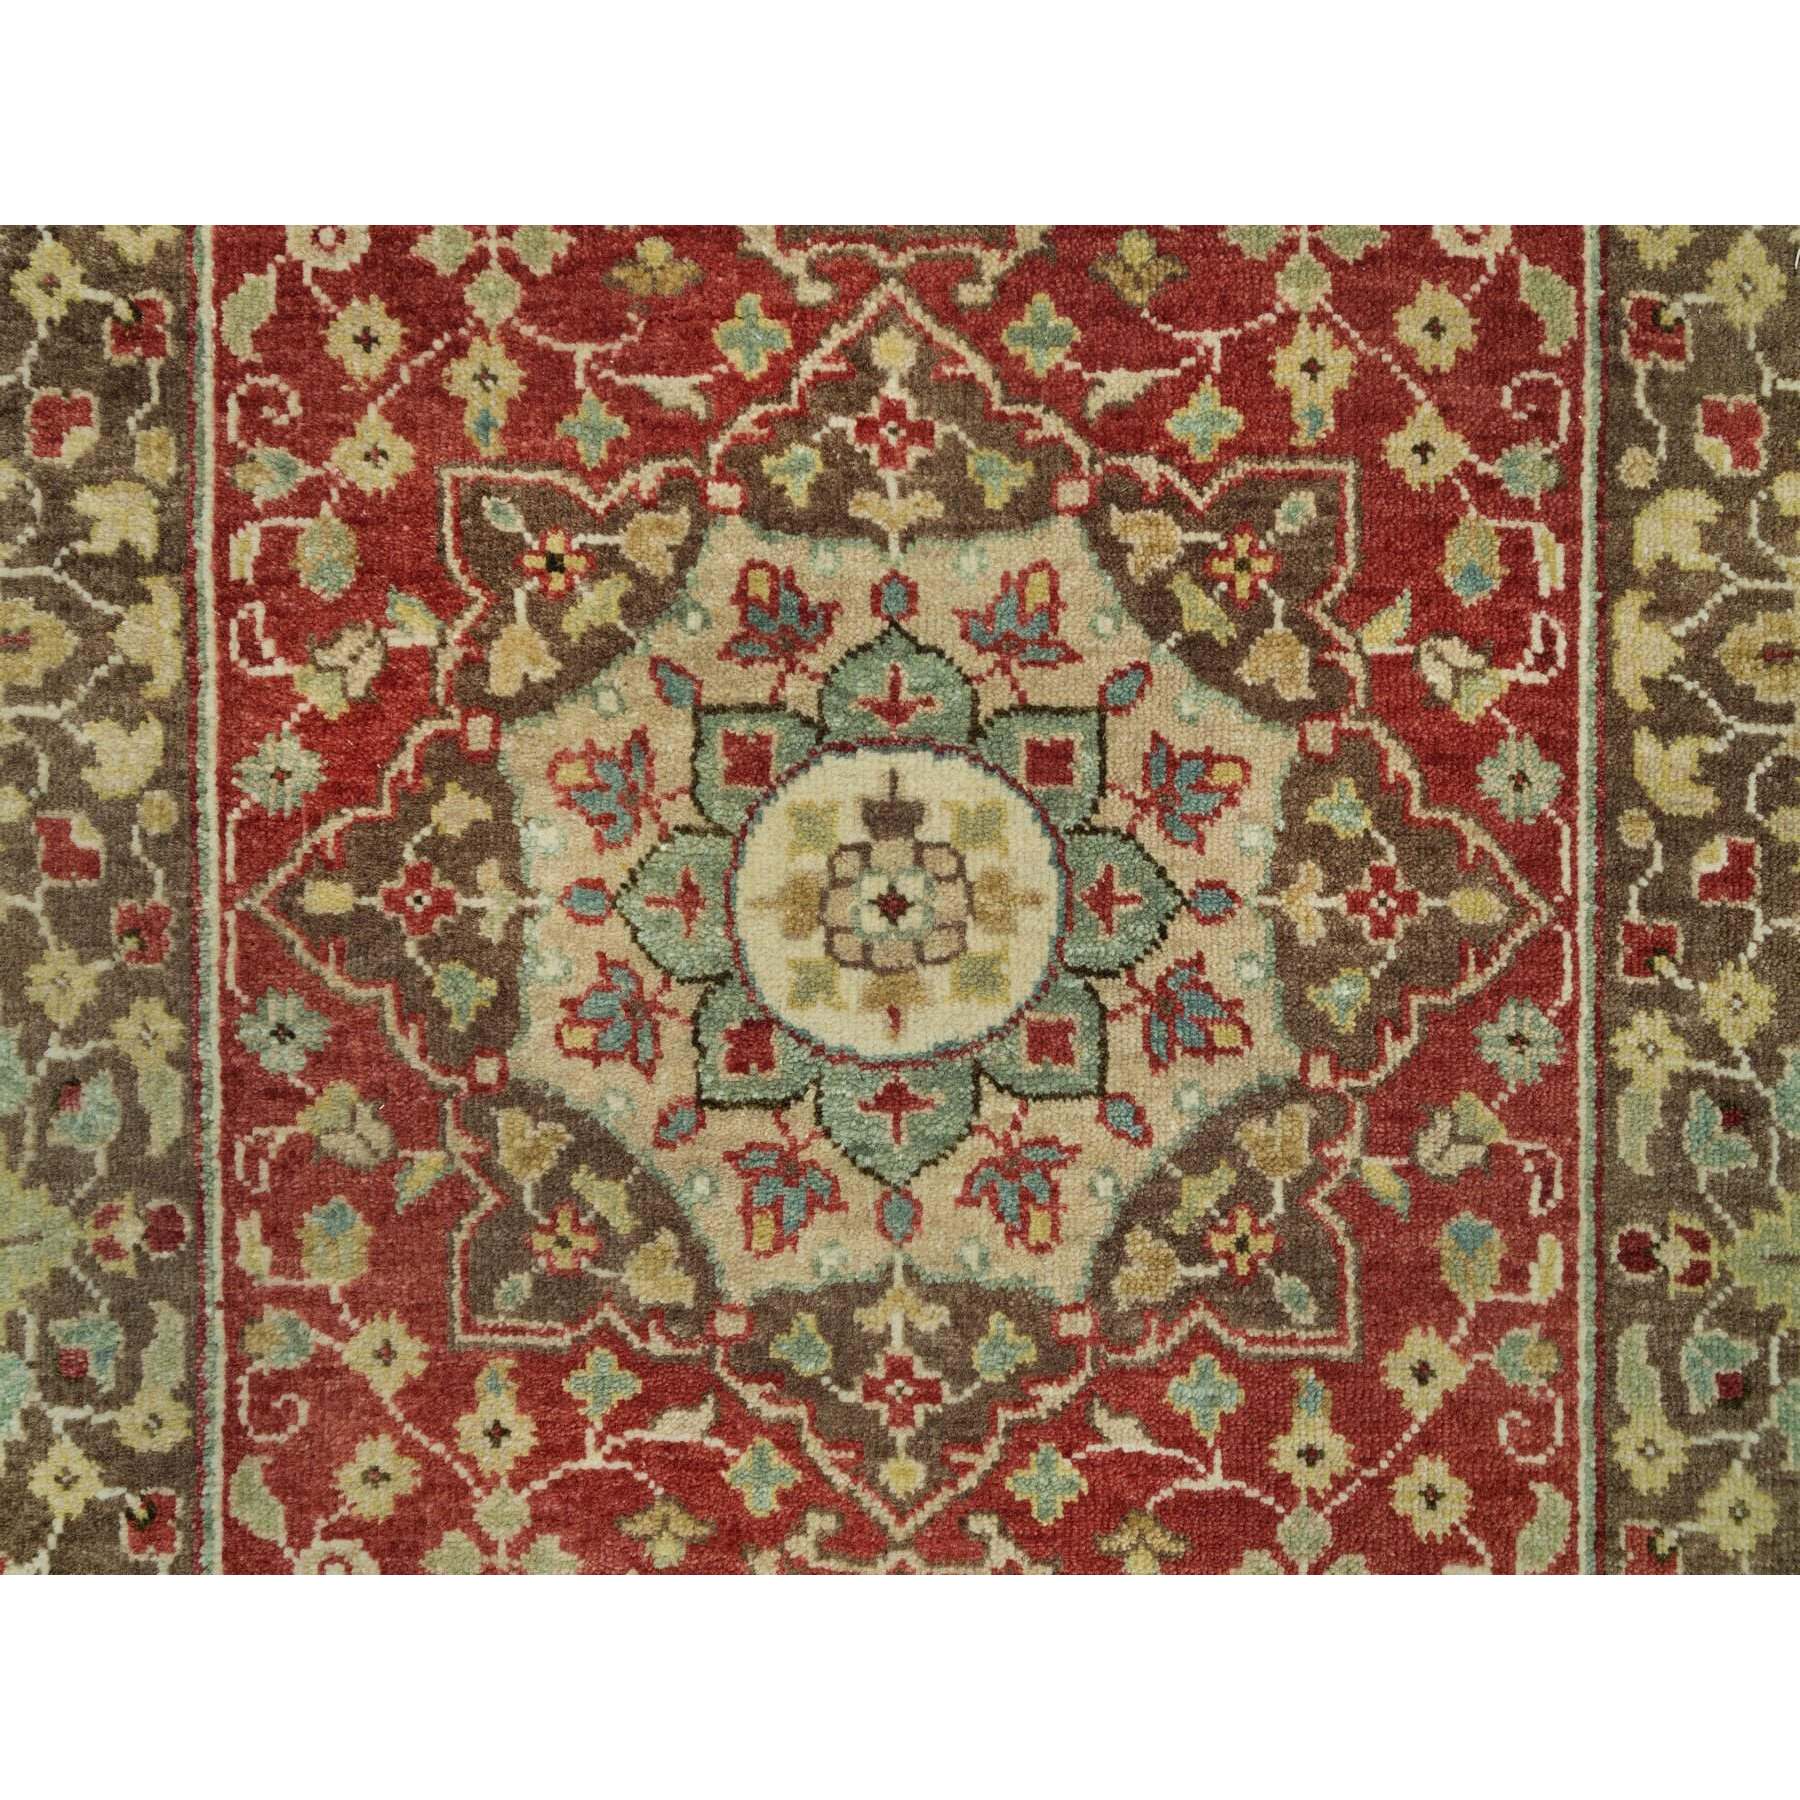 2'7"x22' Cherry Red, Antiqued Tabriz Haji Jalili Design, Fine Weave, Natural Dyes, All Wool, Plush Pile, Hand Woven, XL Runner Oriental Rug 